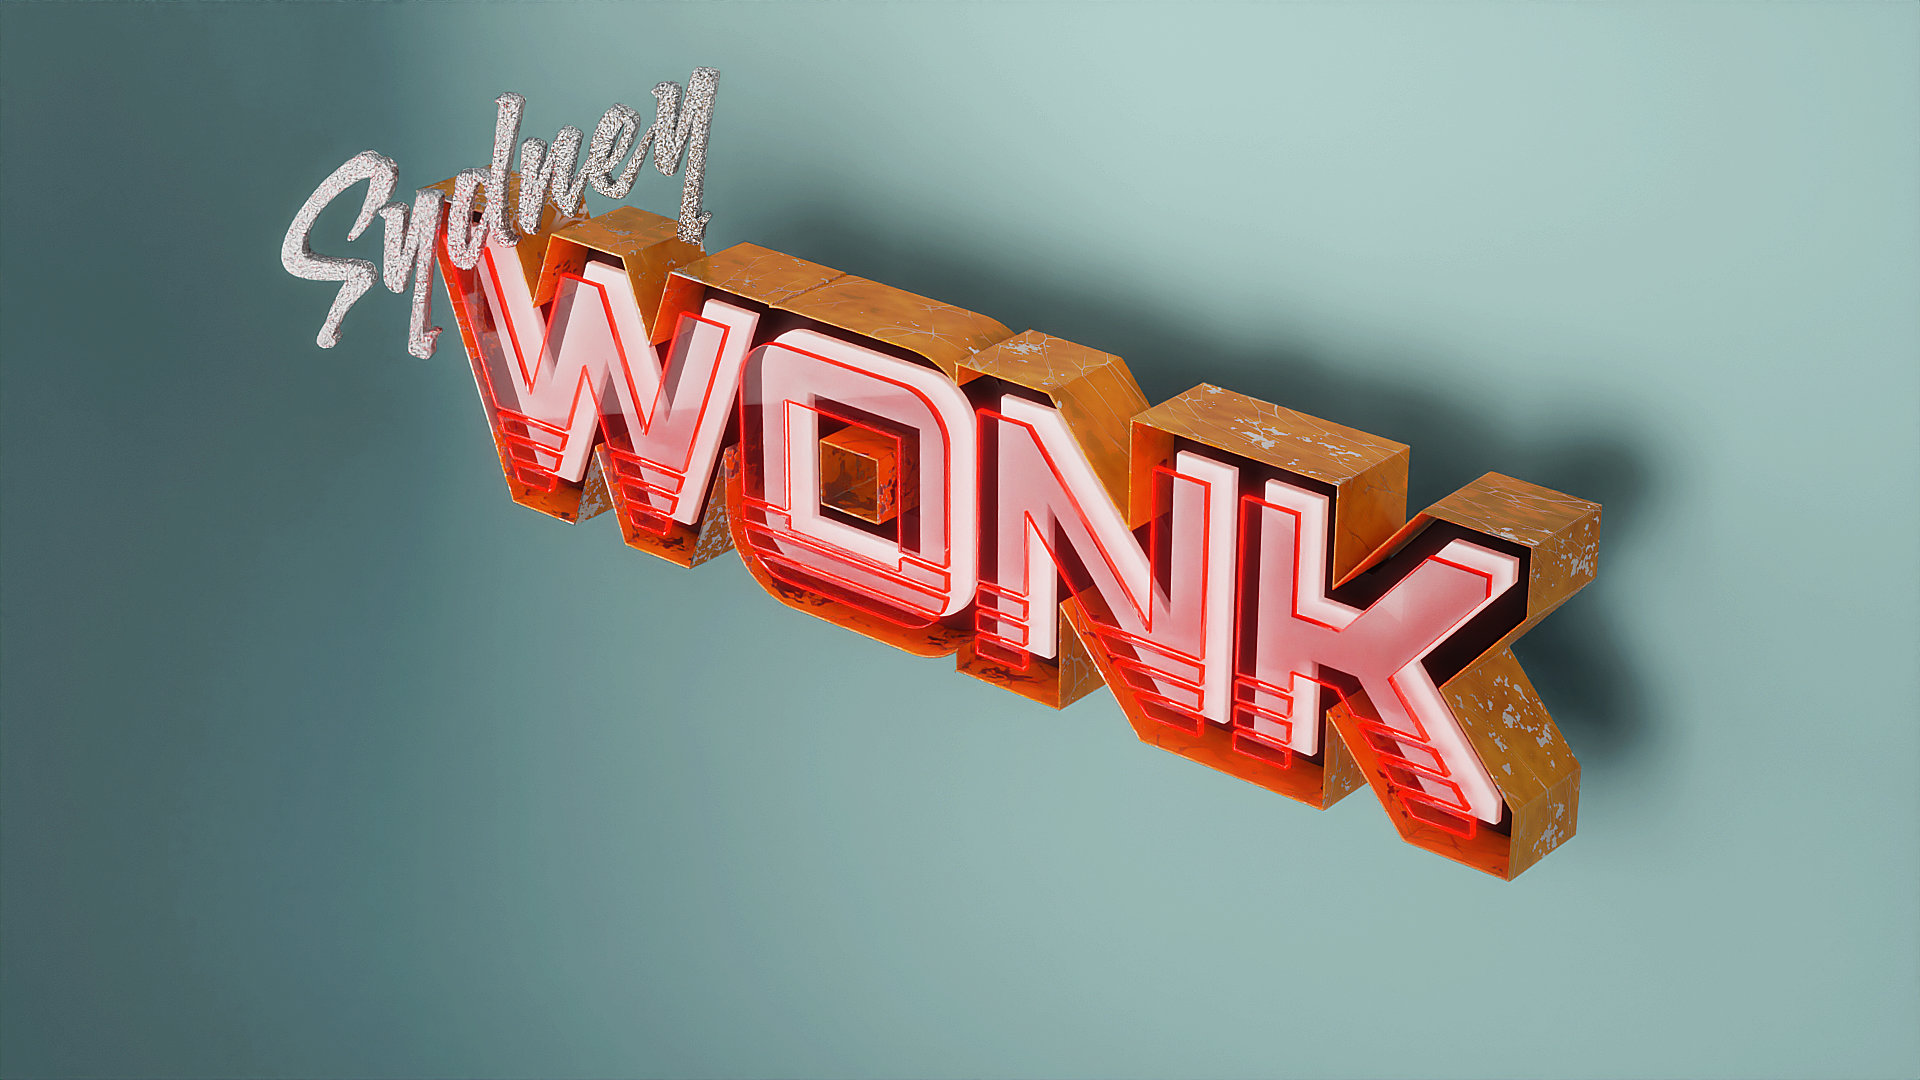 The Musical Artist Sydney Wonk gets his own logo created